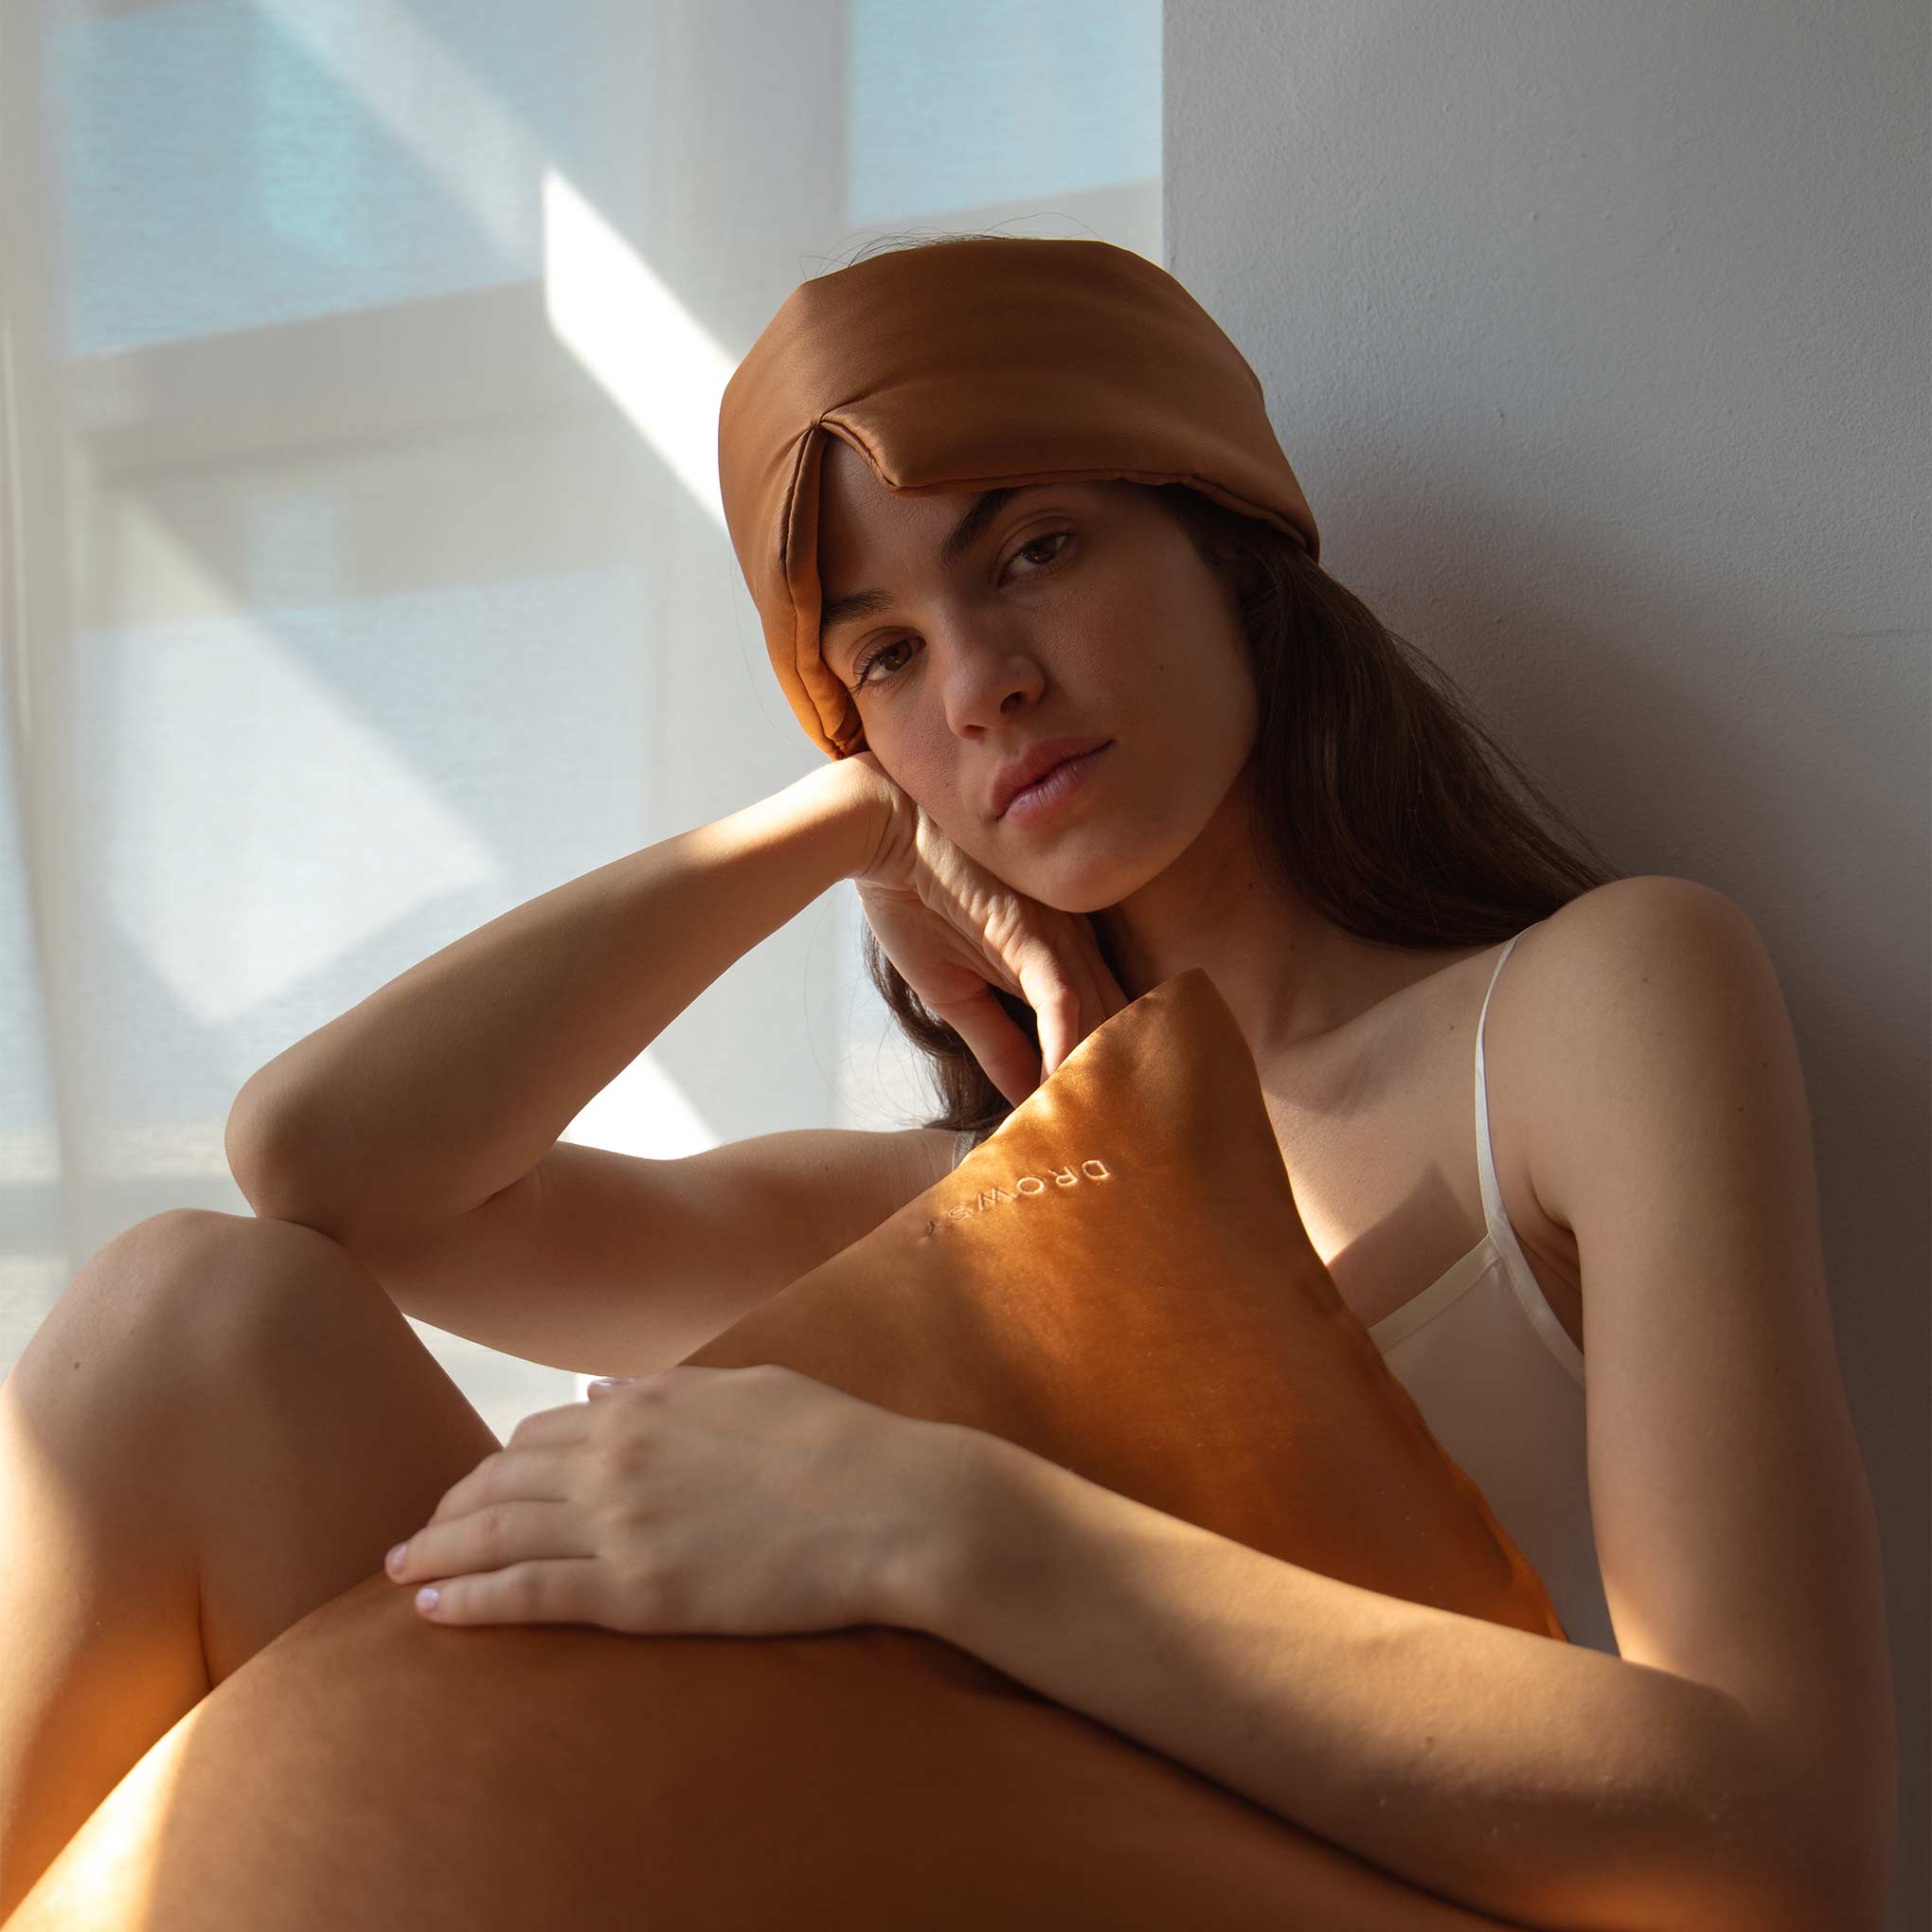 Female model holding terracotta coloured Drowsy silk pillowcase with a Drowsy sleep mask on her forehead